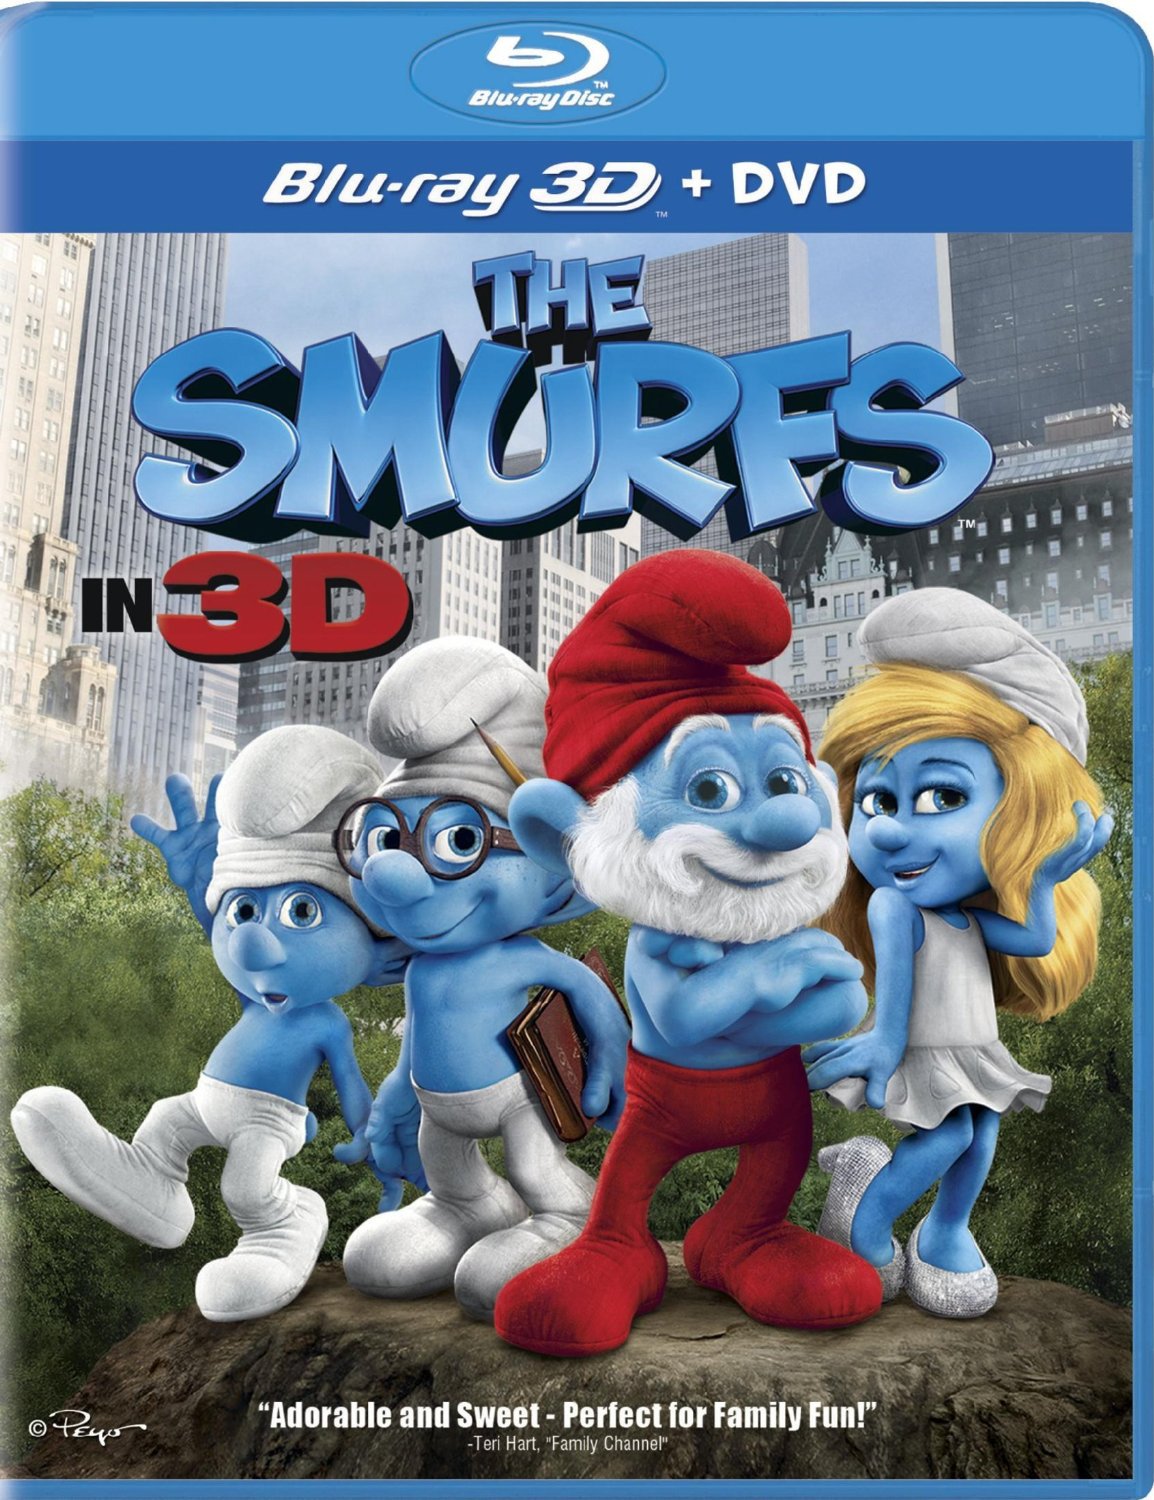 Smurfs in 3D, The